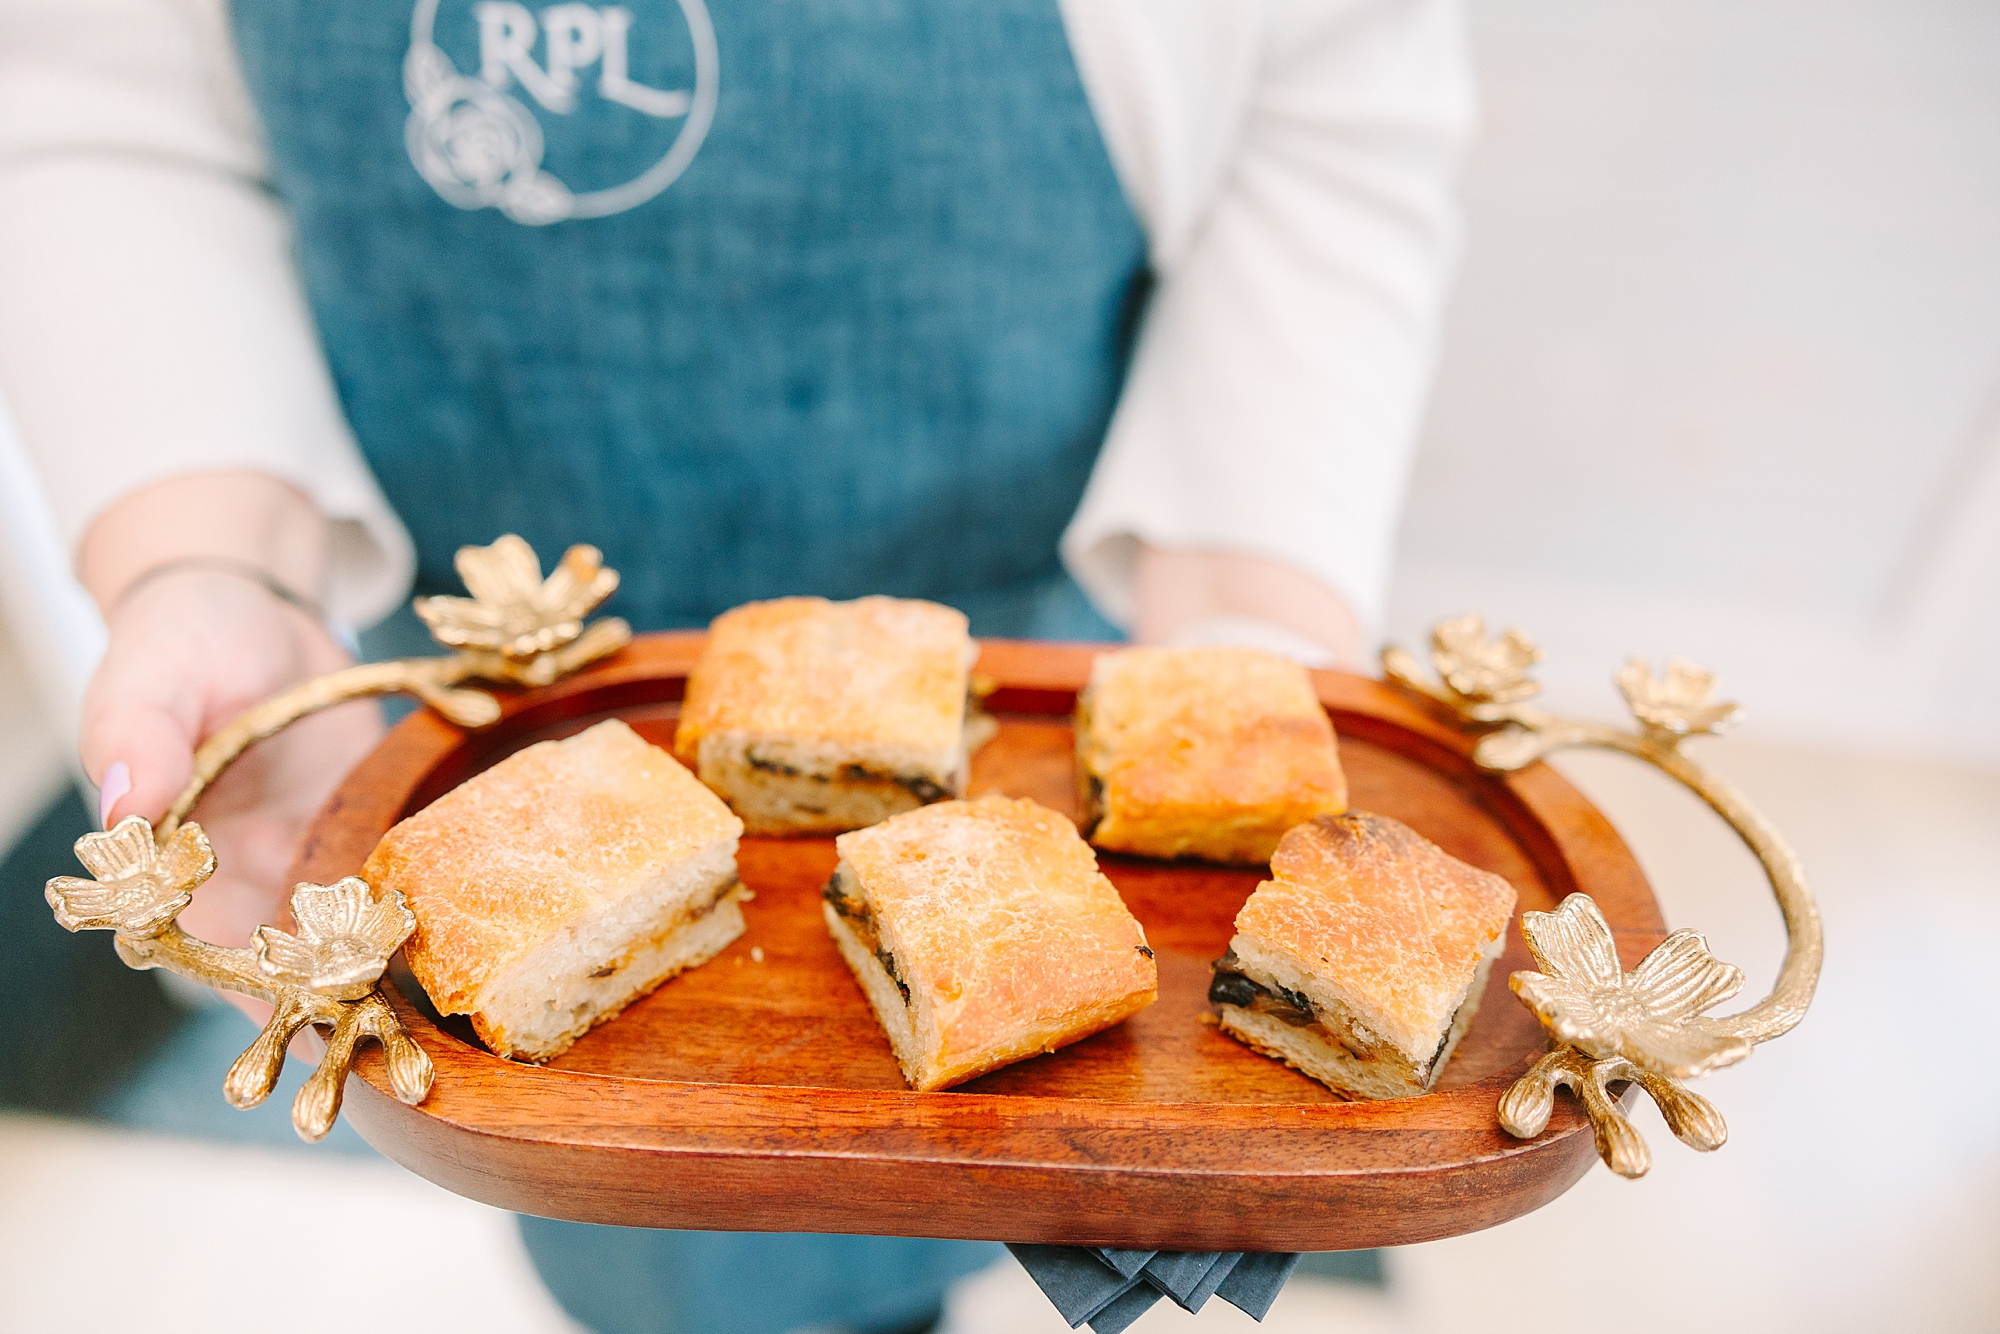 chef in blue apron holds out wooden tray of sandwiches